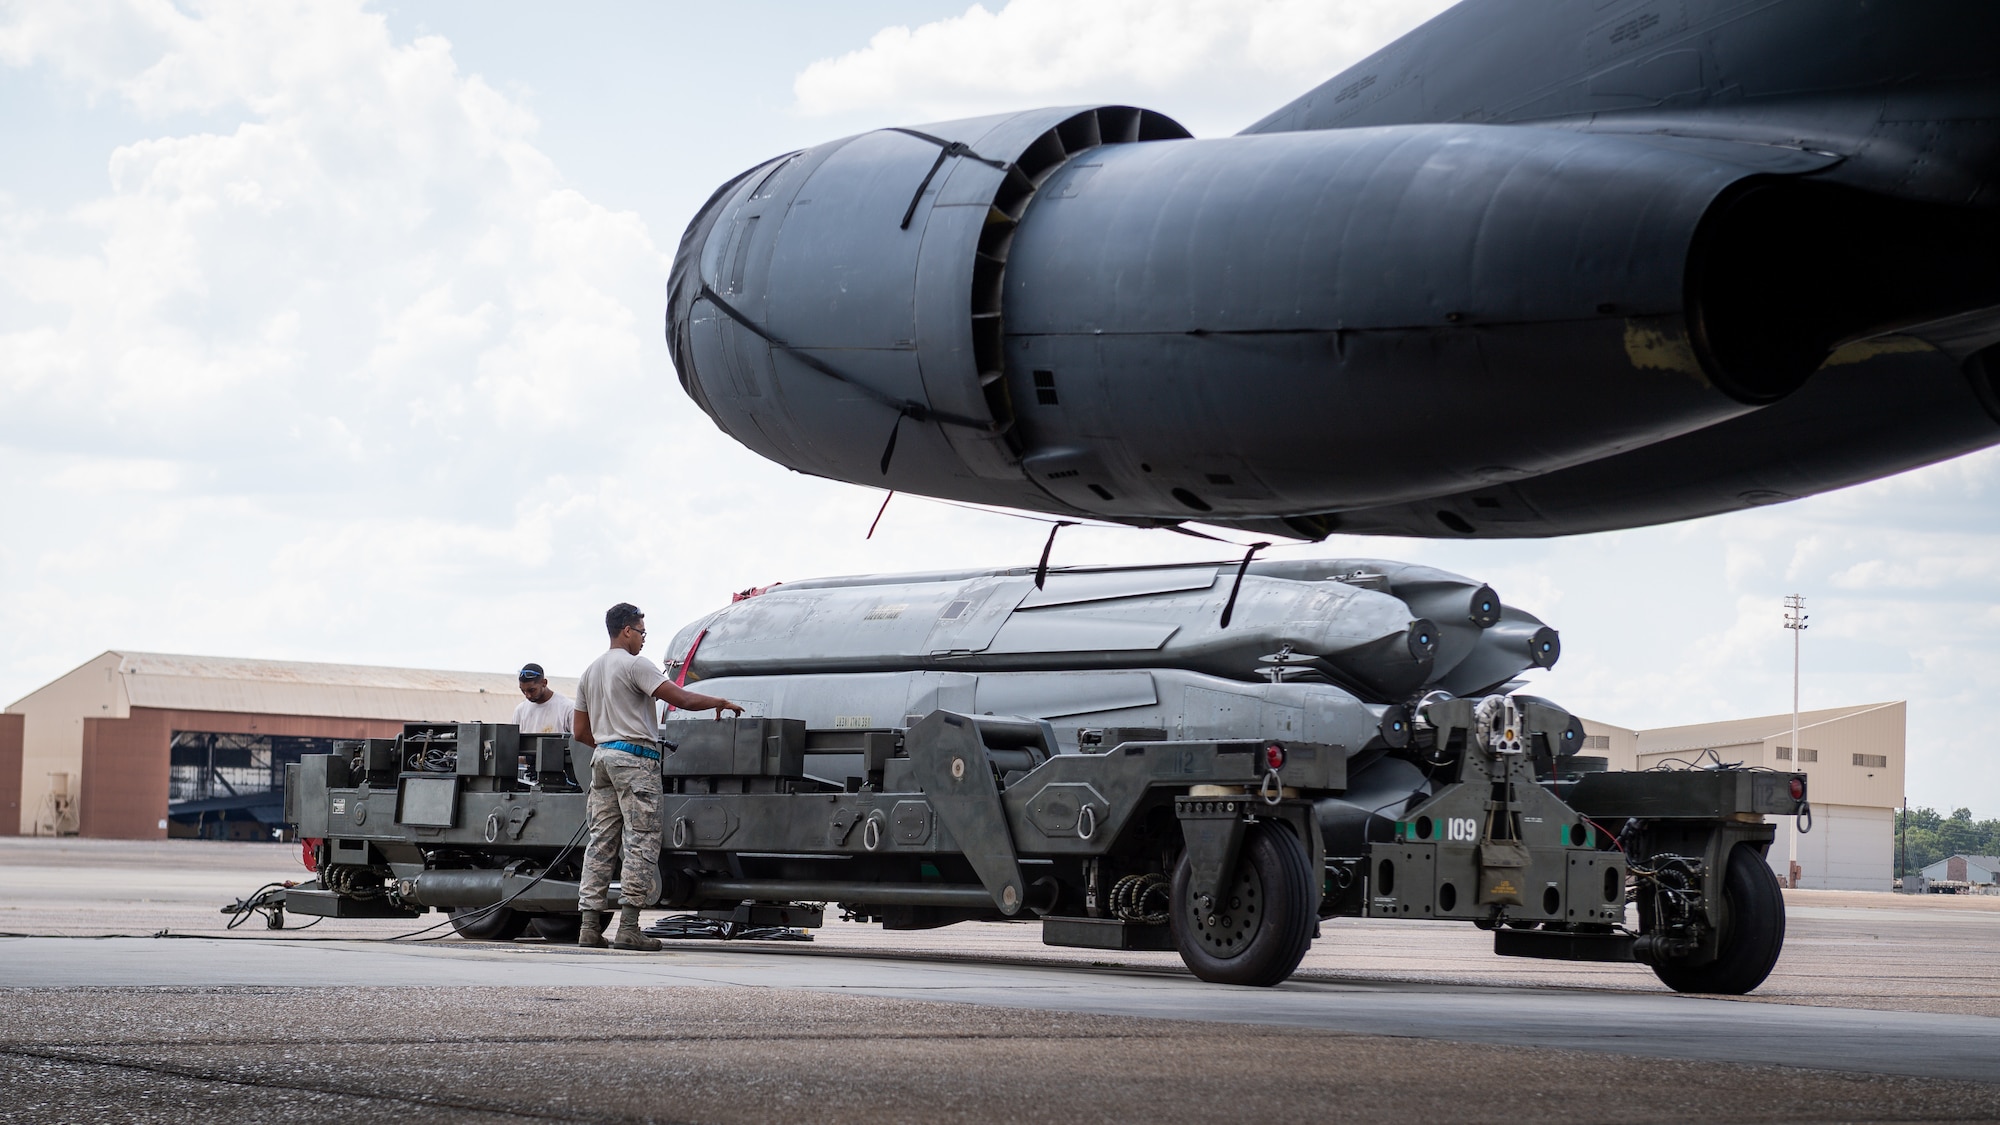 Load crew members of the 20th Aircraft Maintenance Unit prepare to load munitions on a B-52H Stratofortress during an Aircraft Monitor and Control test at Barksdale Air Force Base, La., Aug. 24, 2020. The test is performed every five to ten years to demonstrate the capability of the B-52 to provide the required voltage levels for the mission configuration in the AGM-86 air-launched cruise missile interface. (U.S. Air Force photo by Senior Airman Lillian Miller)